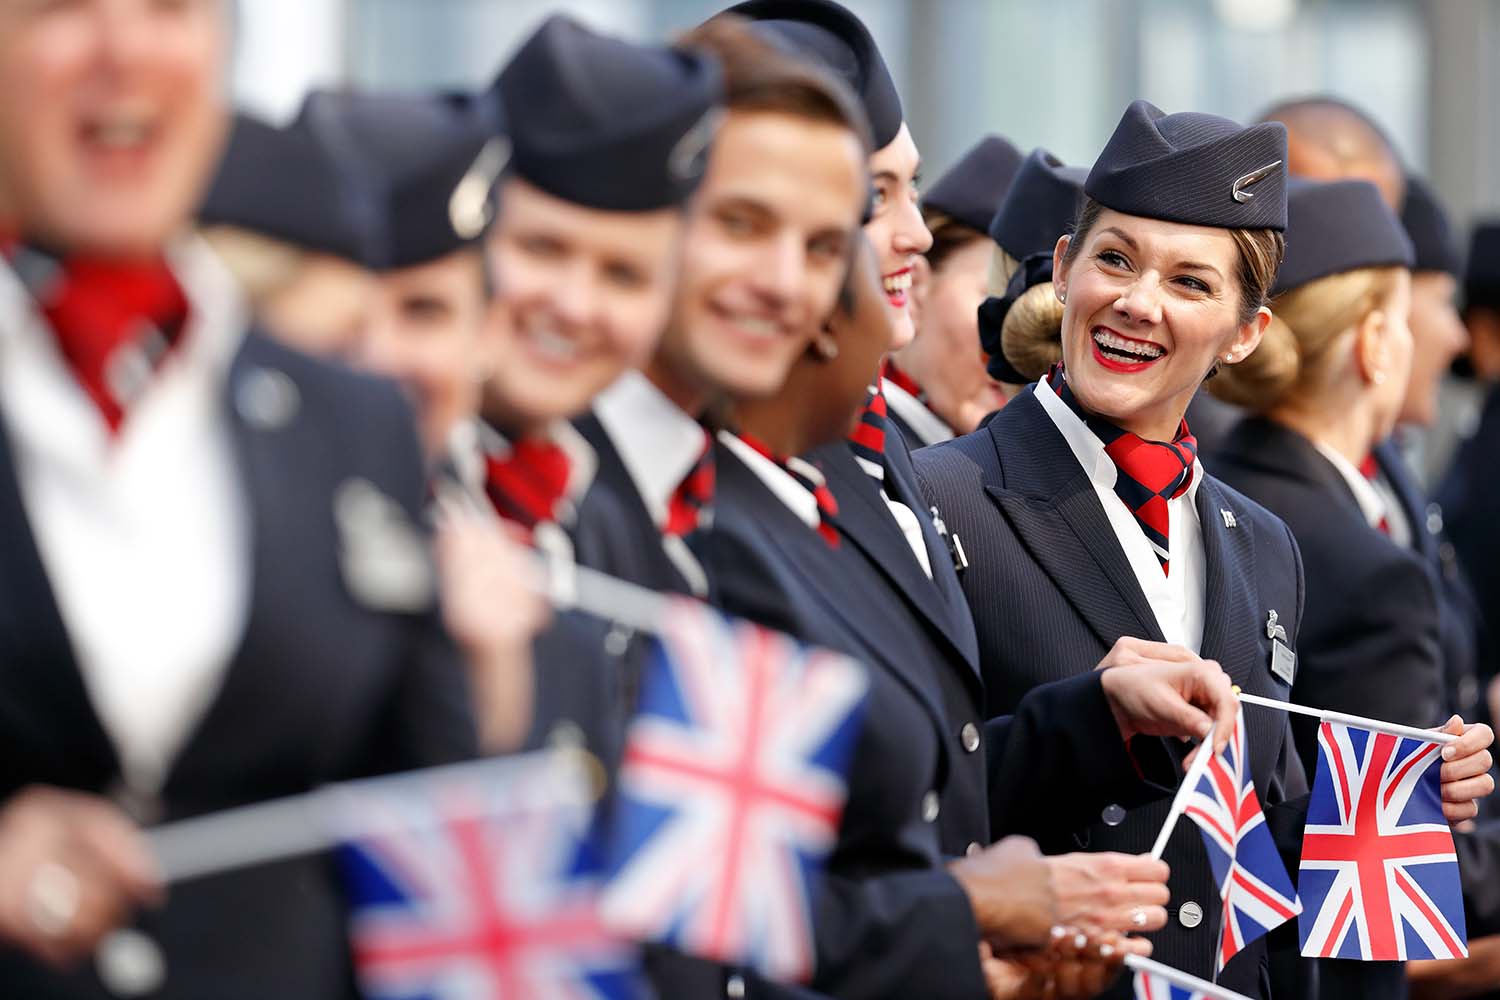 British Airways Says Yes to Makeup for Male Cabin Crew - InsideHook